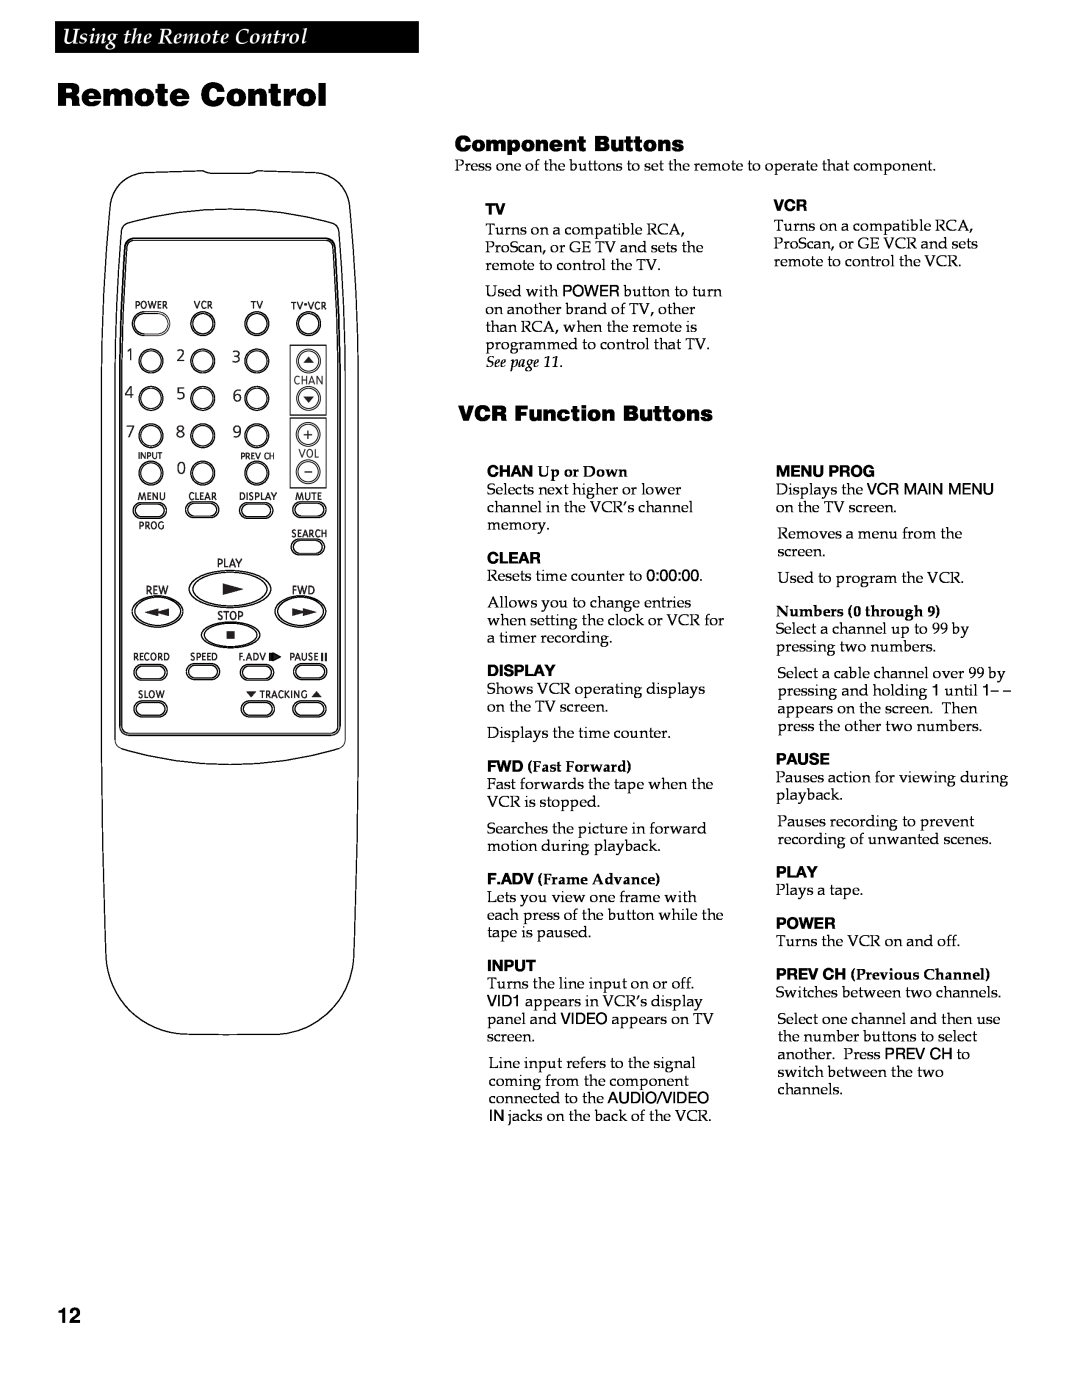 RCA VR609HF Component Buttons, VCR Function Buttons, Using the Remote Control, CHAN Up or Down, Clear, Display, Input 